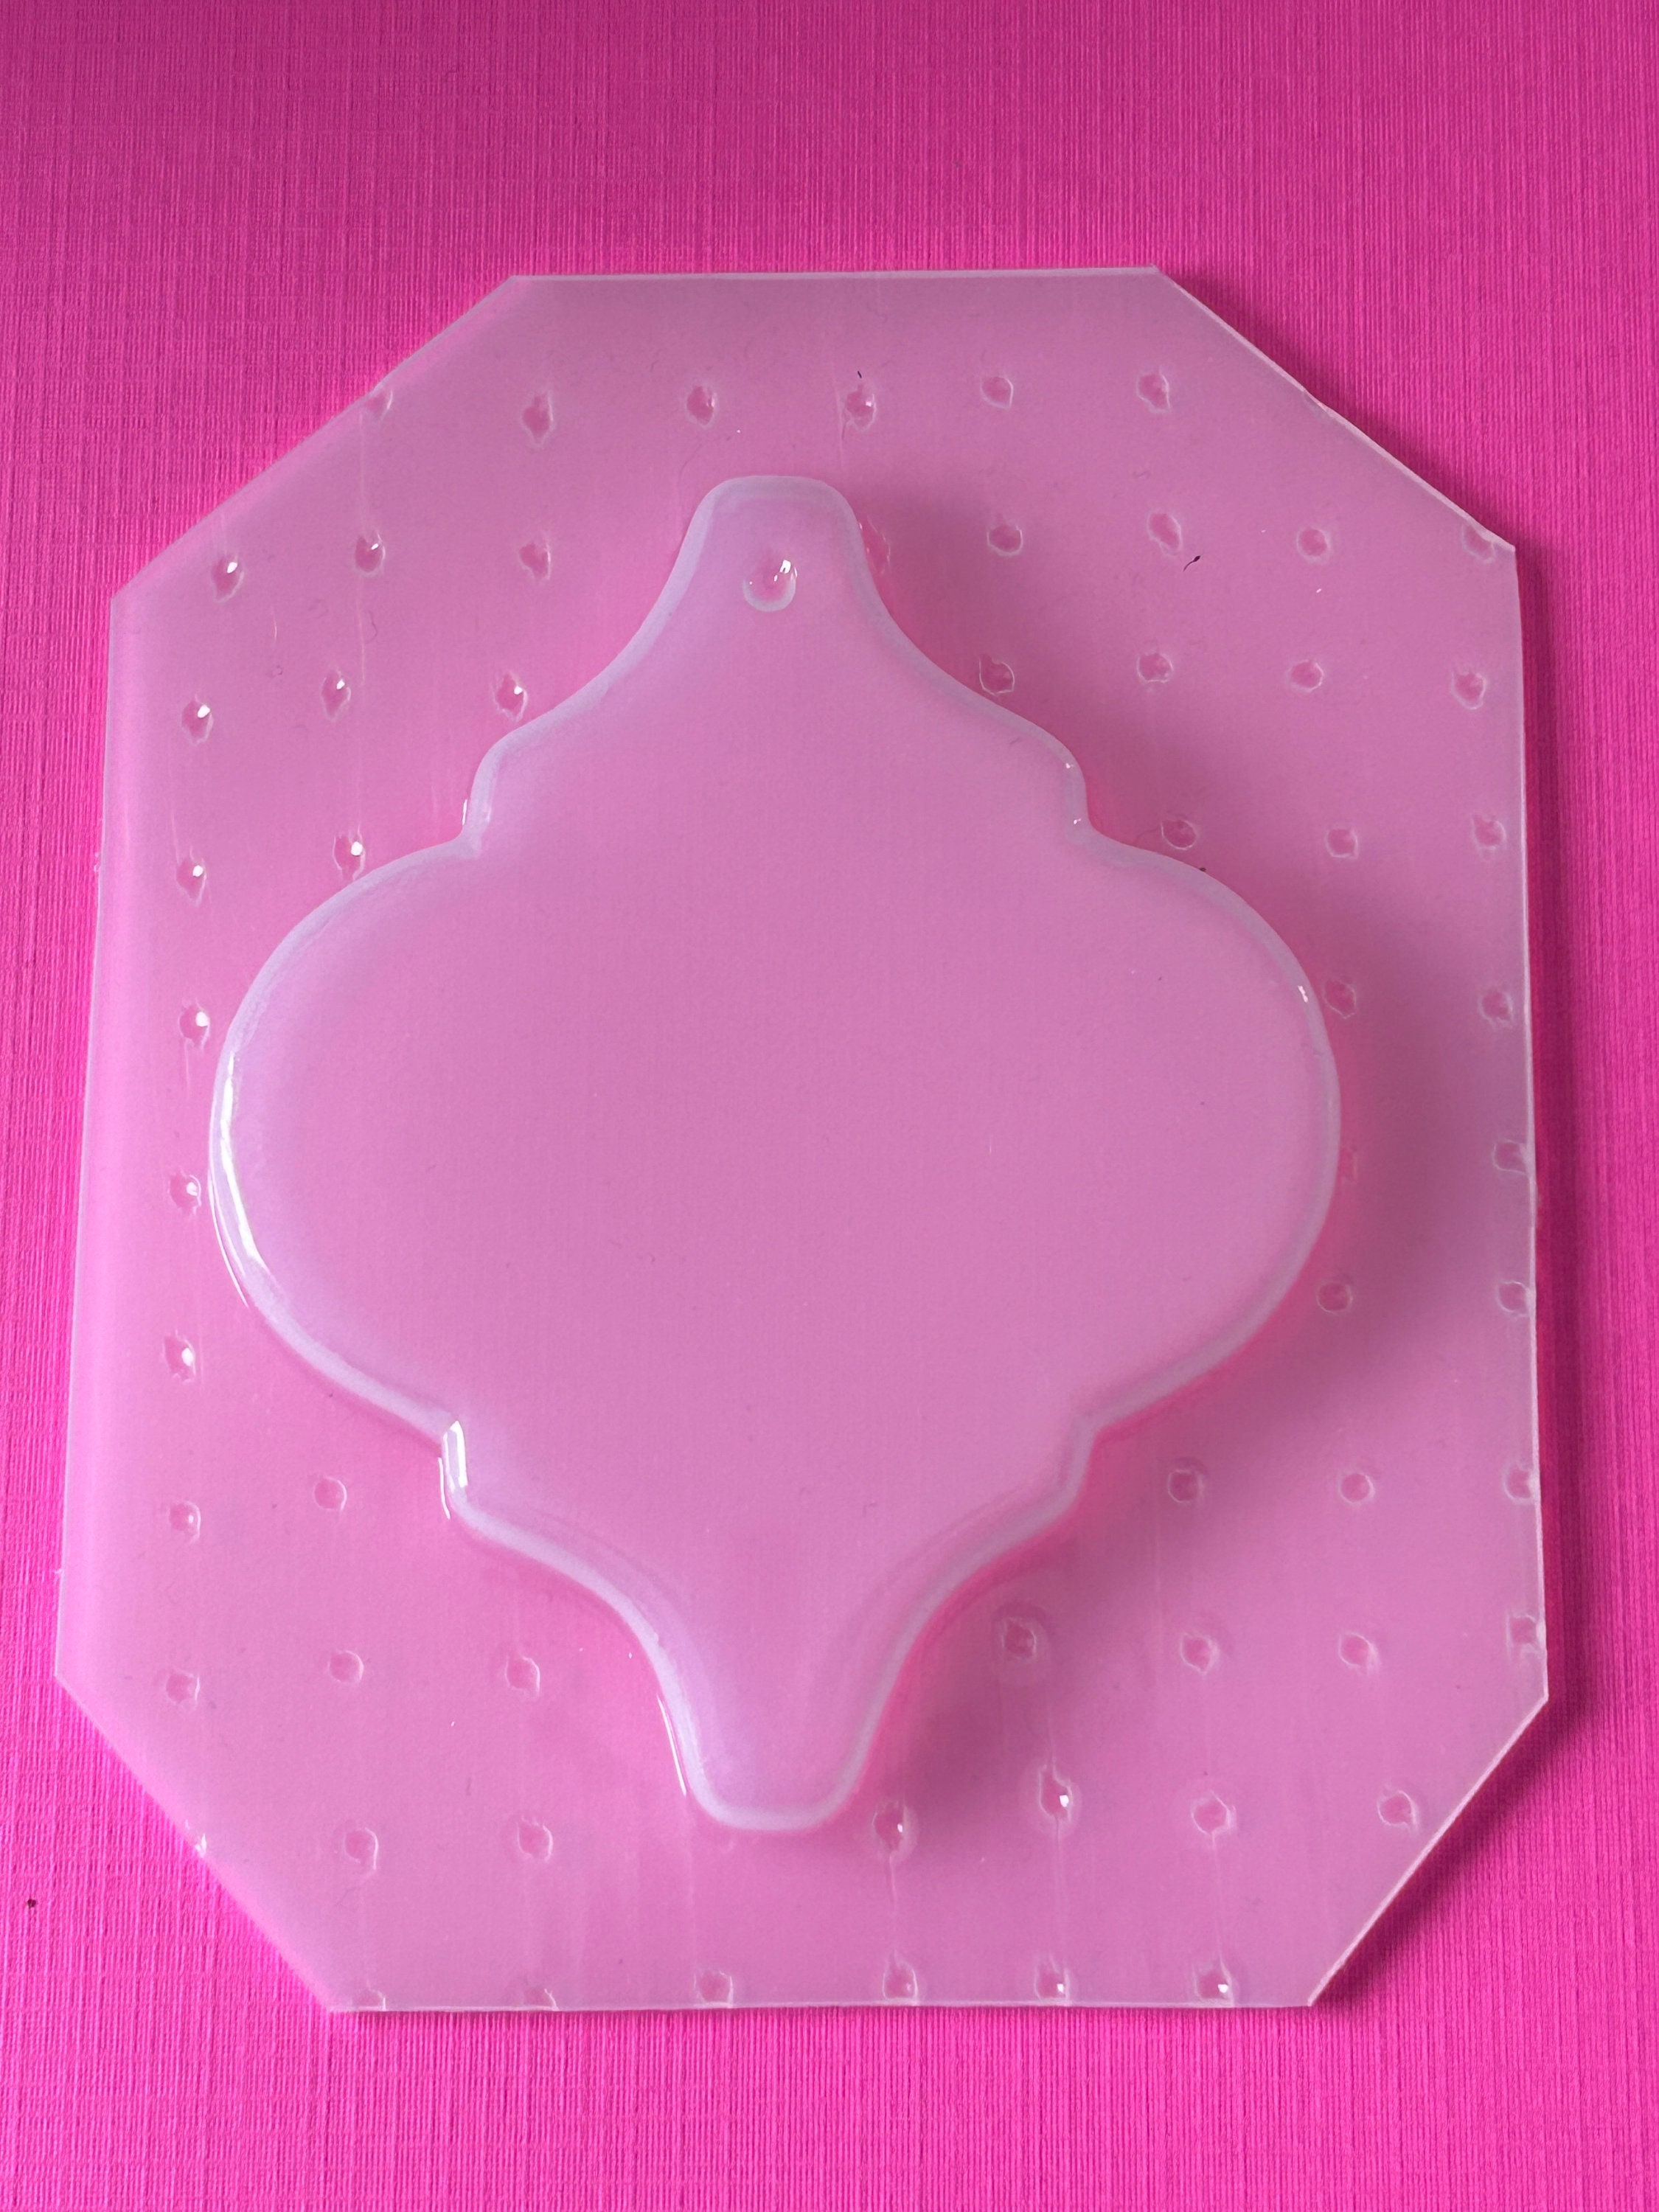 1608 Incredible Resin Effects From This Amazing Arabesque Silicone Mold 